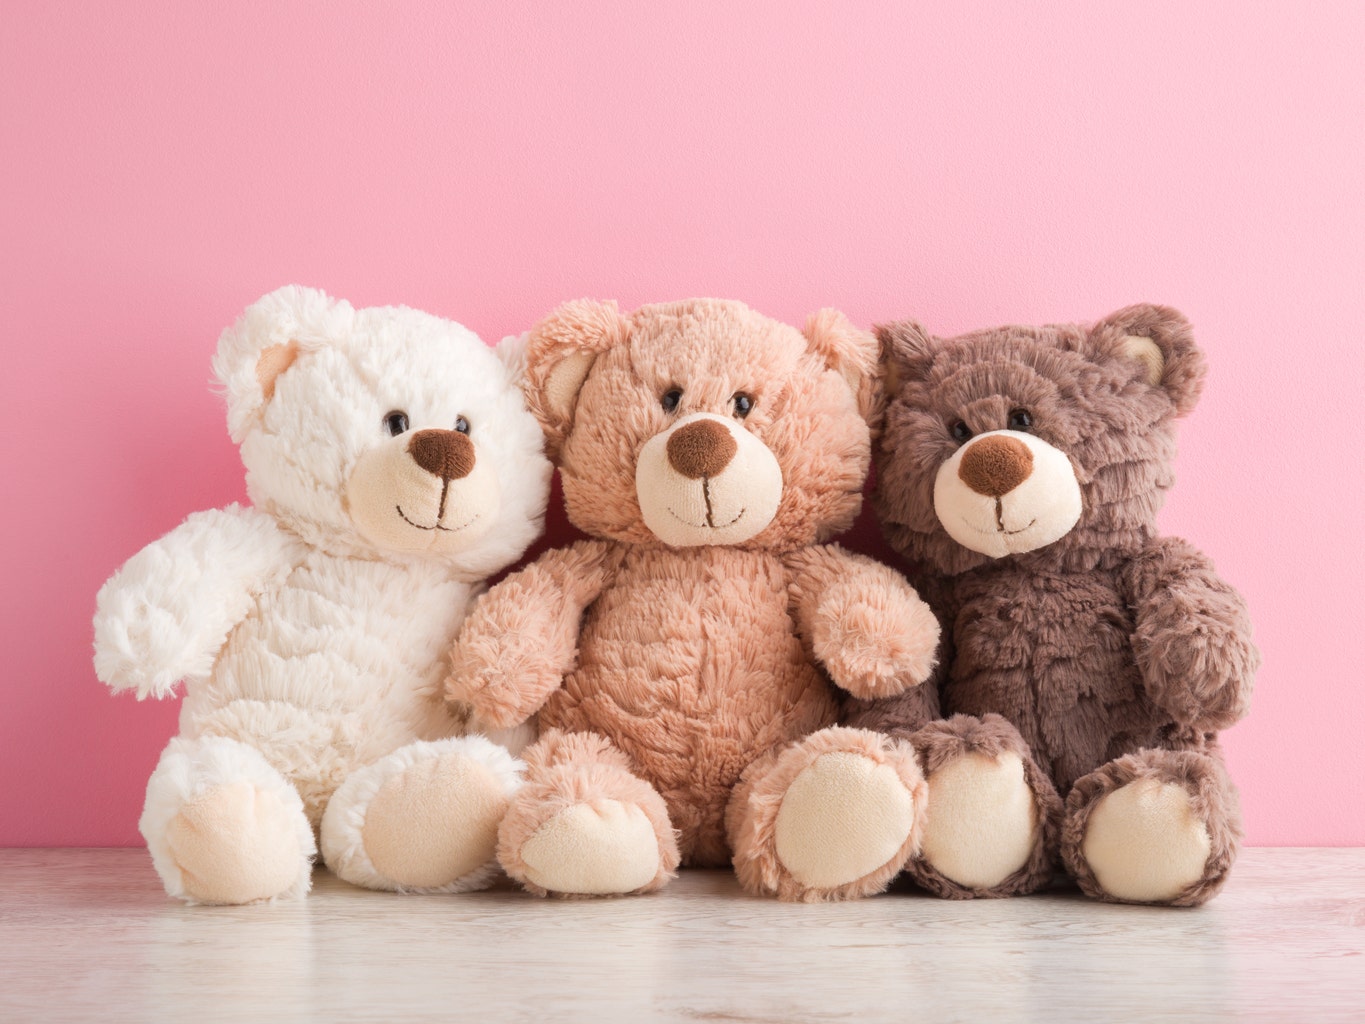 Build-A-Bear Workshop: An Undervalued Investment Opportunity (NYSE:BBW)